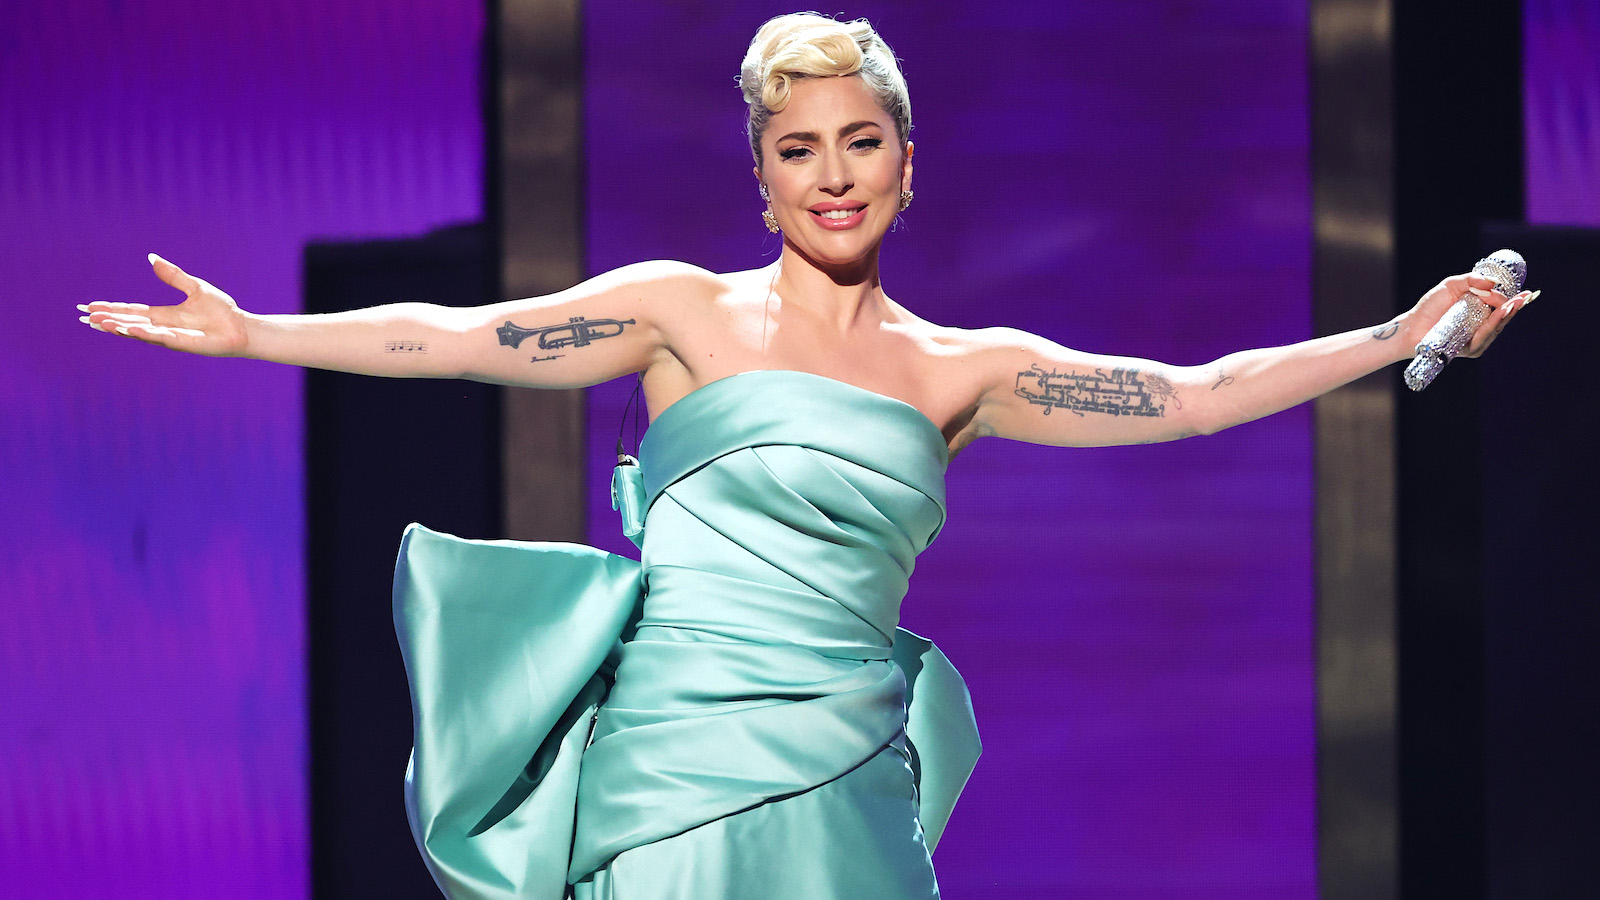 Lady Gaga in a teal colored dress on stage